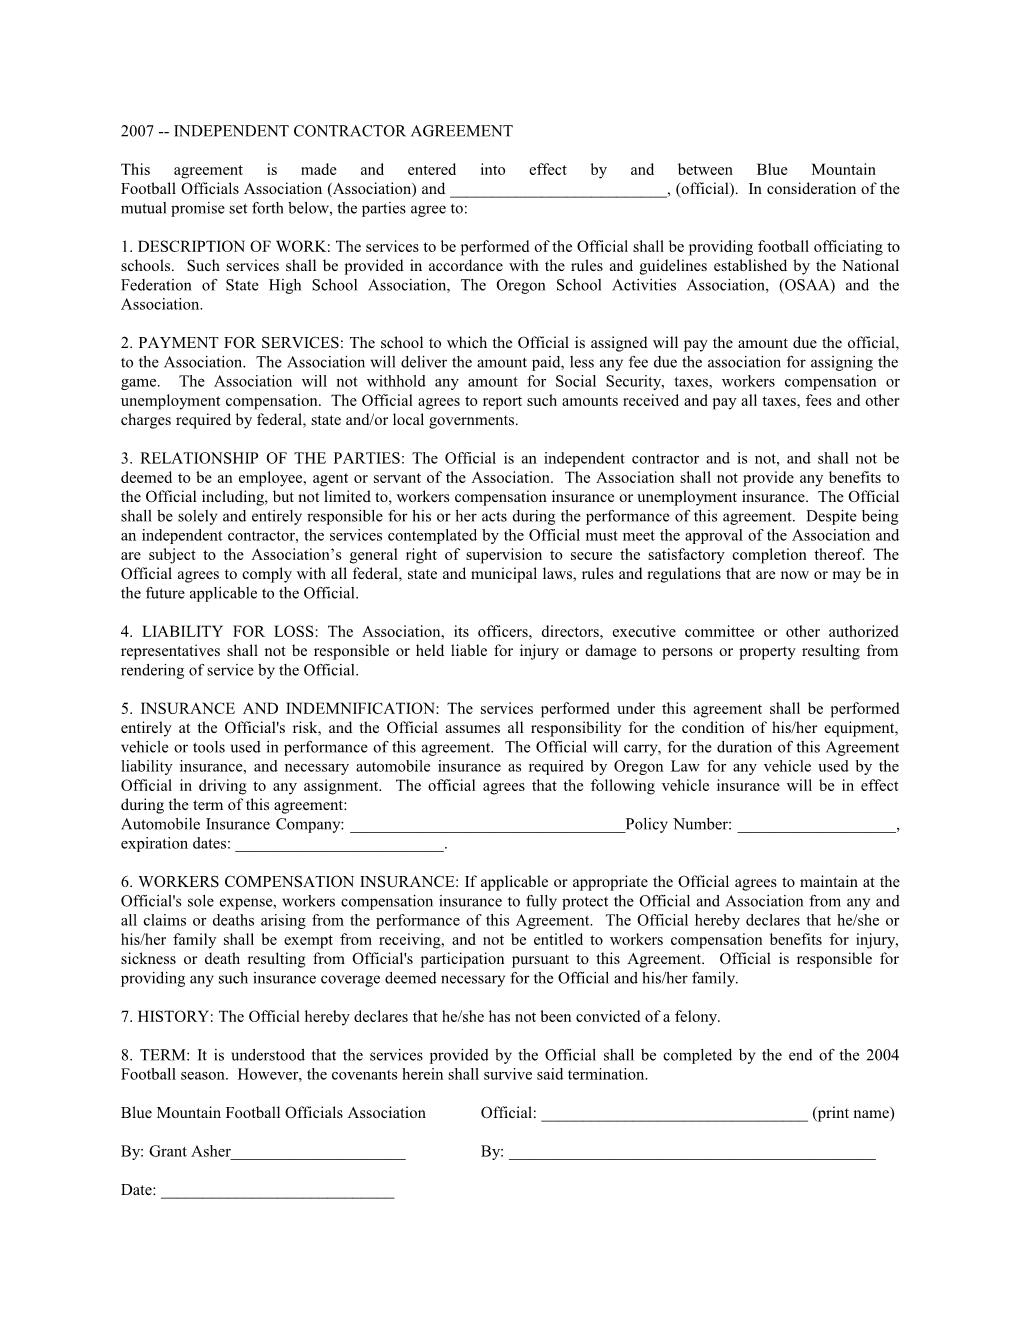 Independent Contractor Agreement for Officiating Sports